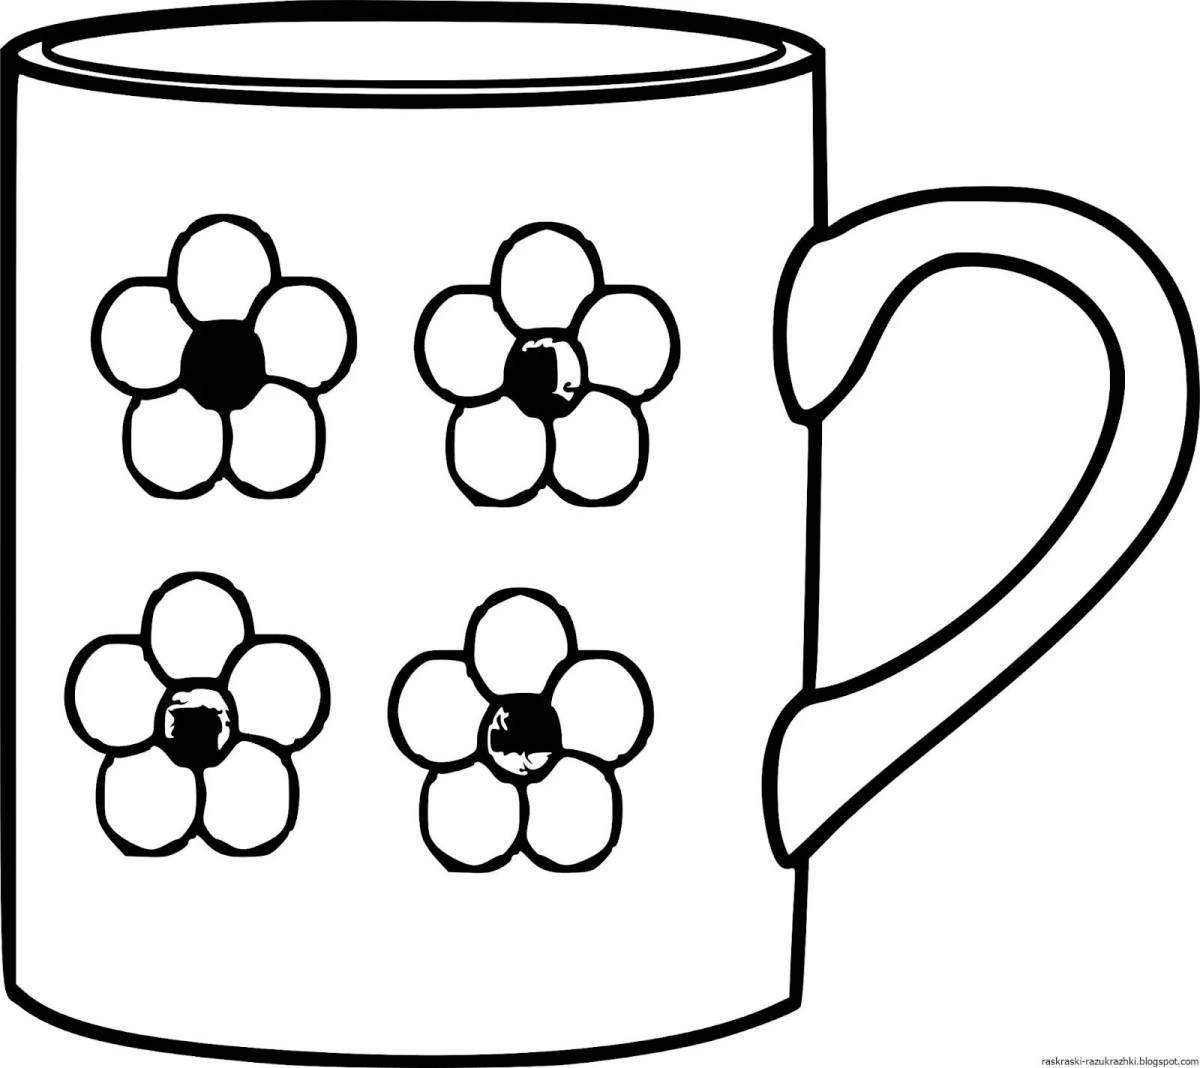 Adorable coloring mug for 4-5 year olds